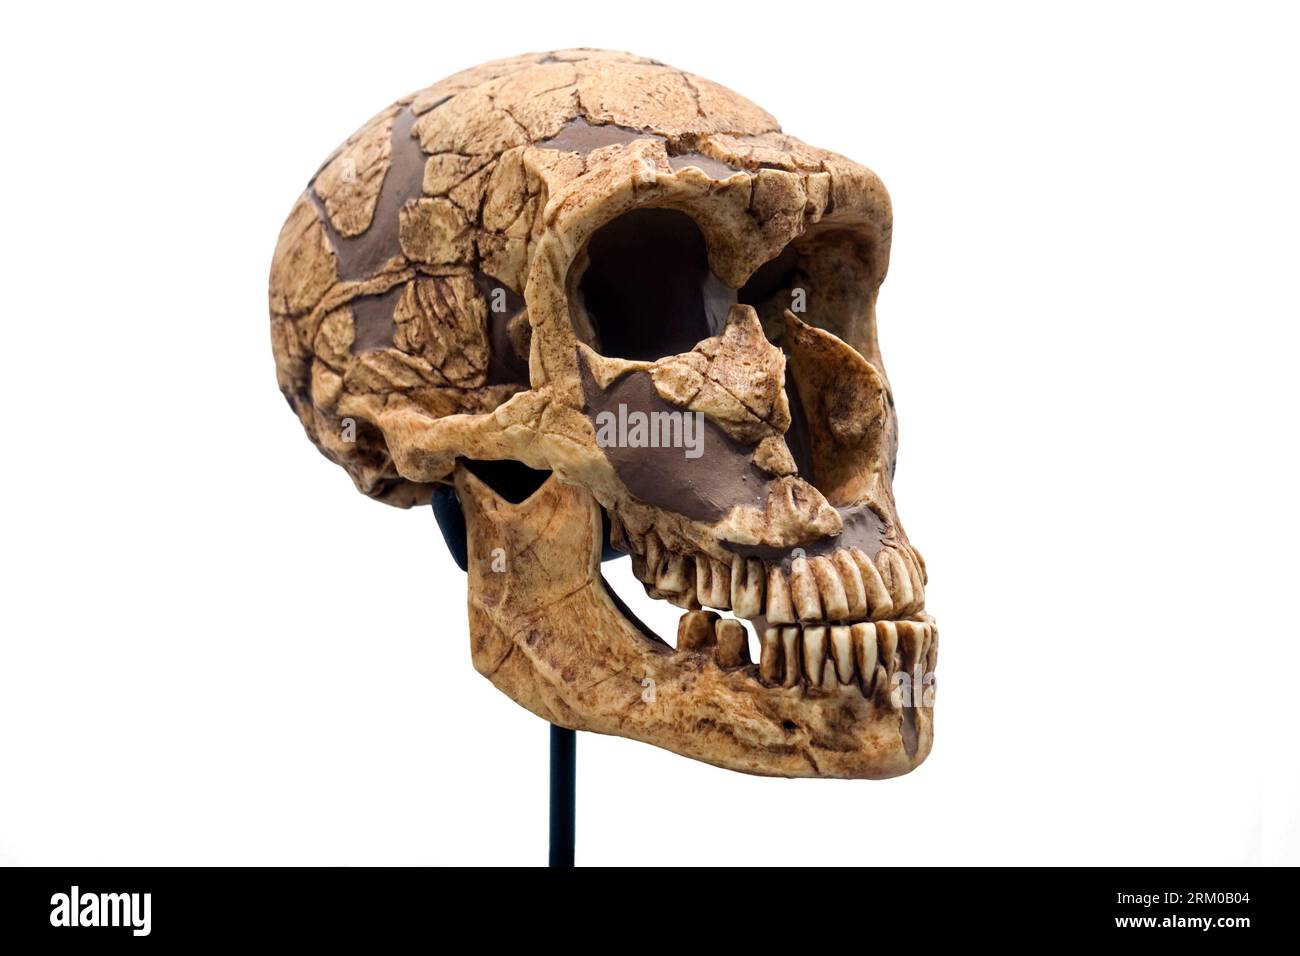 Skull replica of Homo neanderthalensis / Neanderthal, extinct species of archaic human who lived in Eurasia until about 40,000 years ago Stock Photo